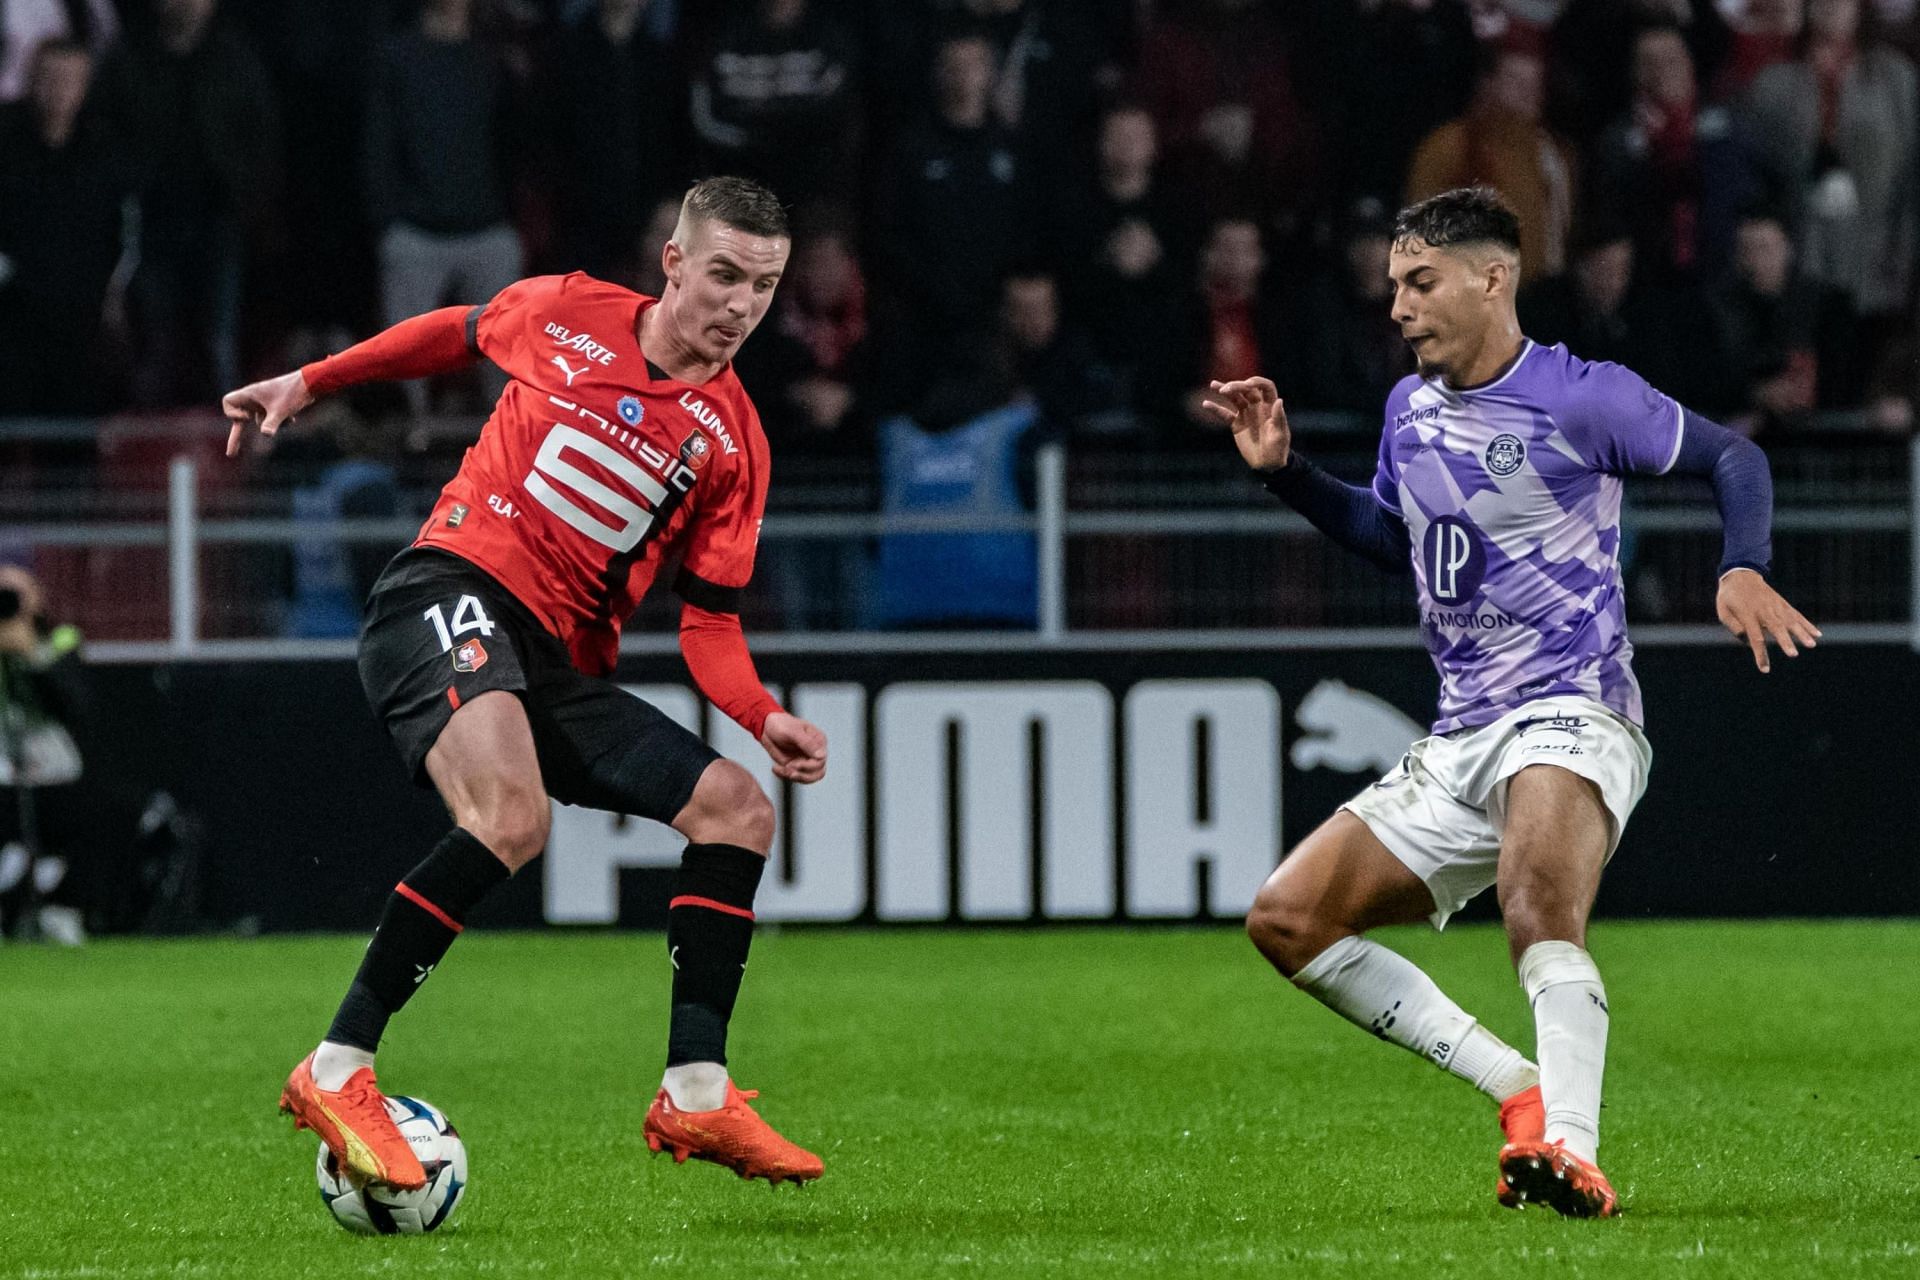 Toulouse and Rennes will square off in Ligue 1 on Sunday